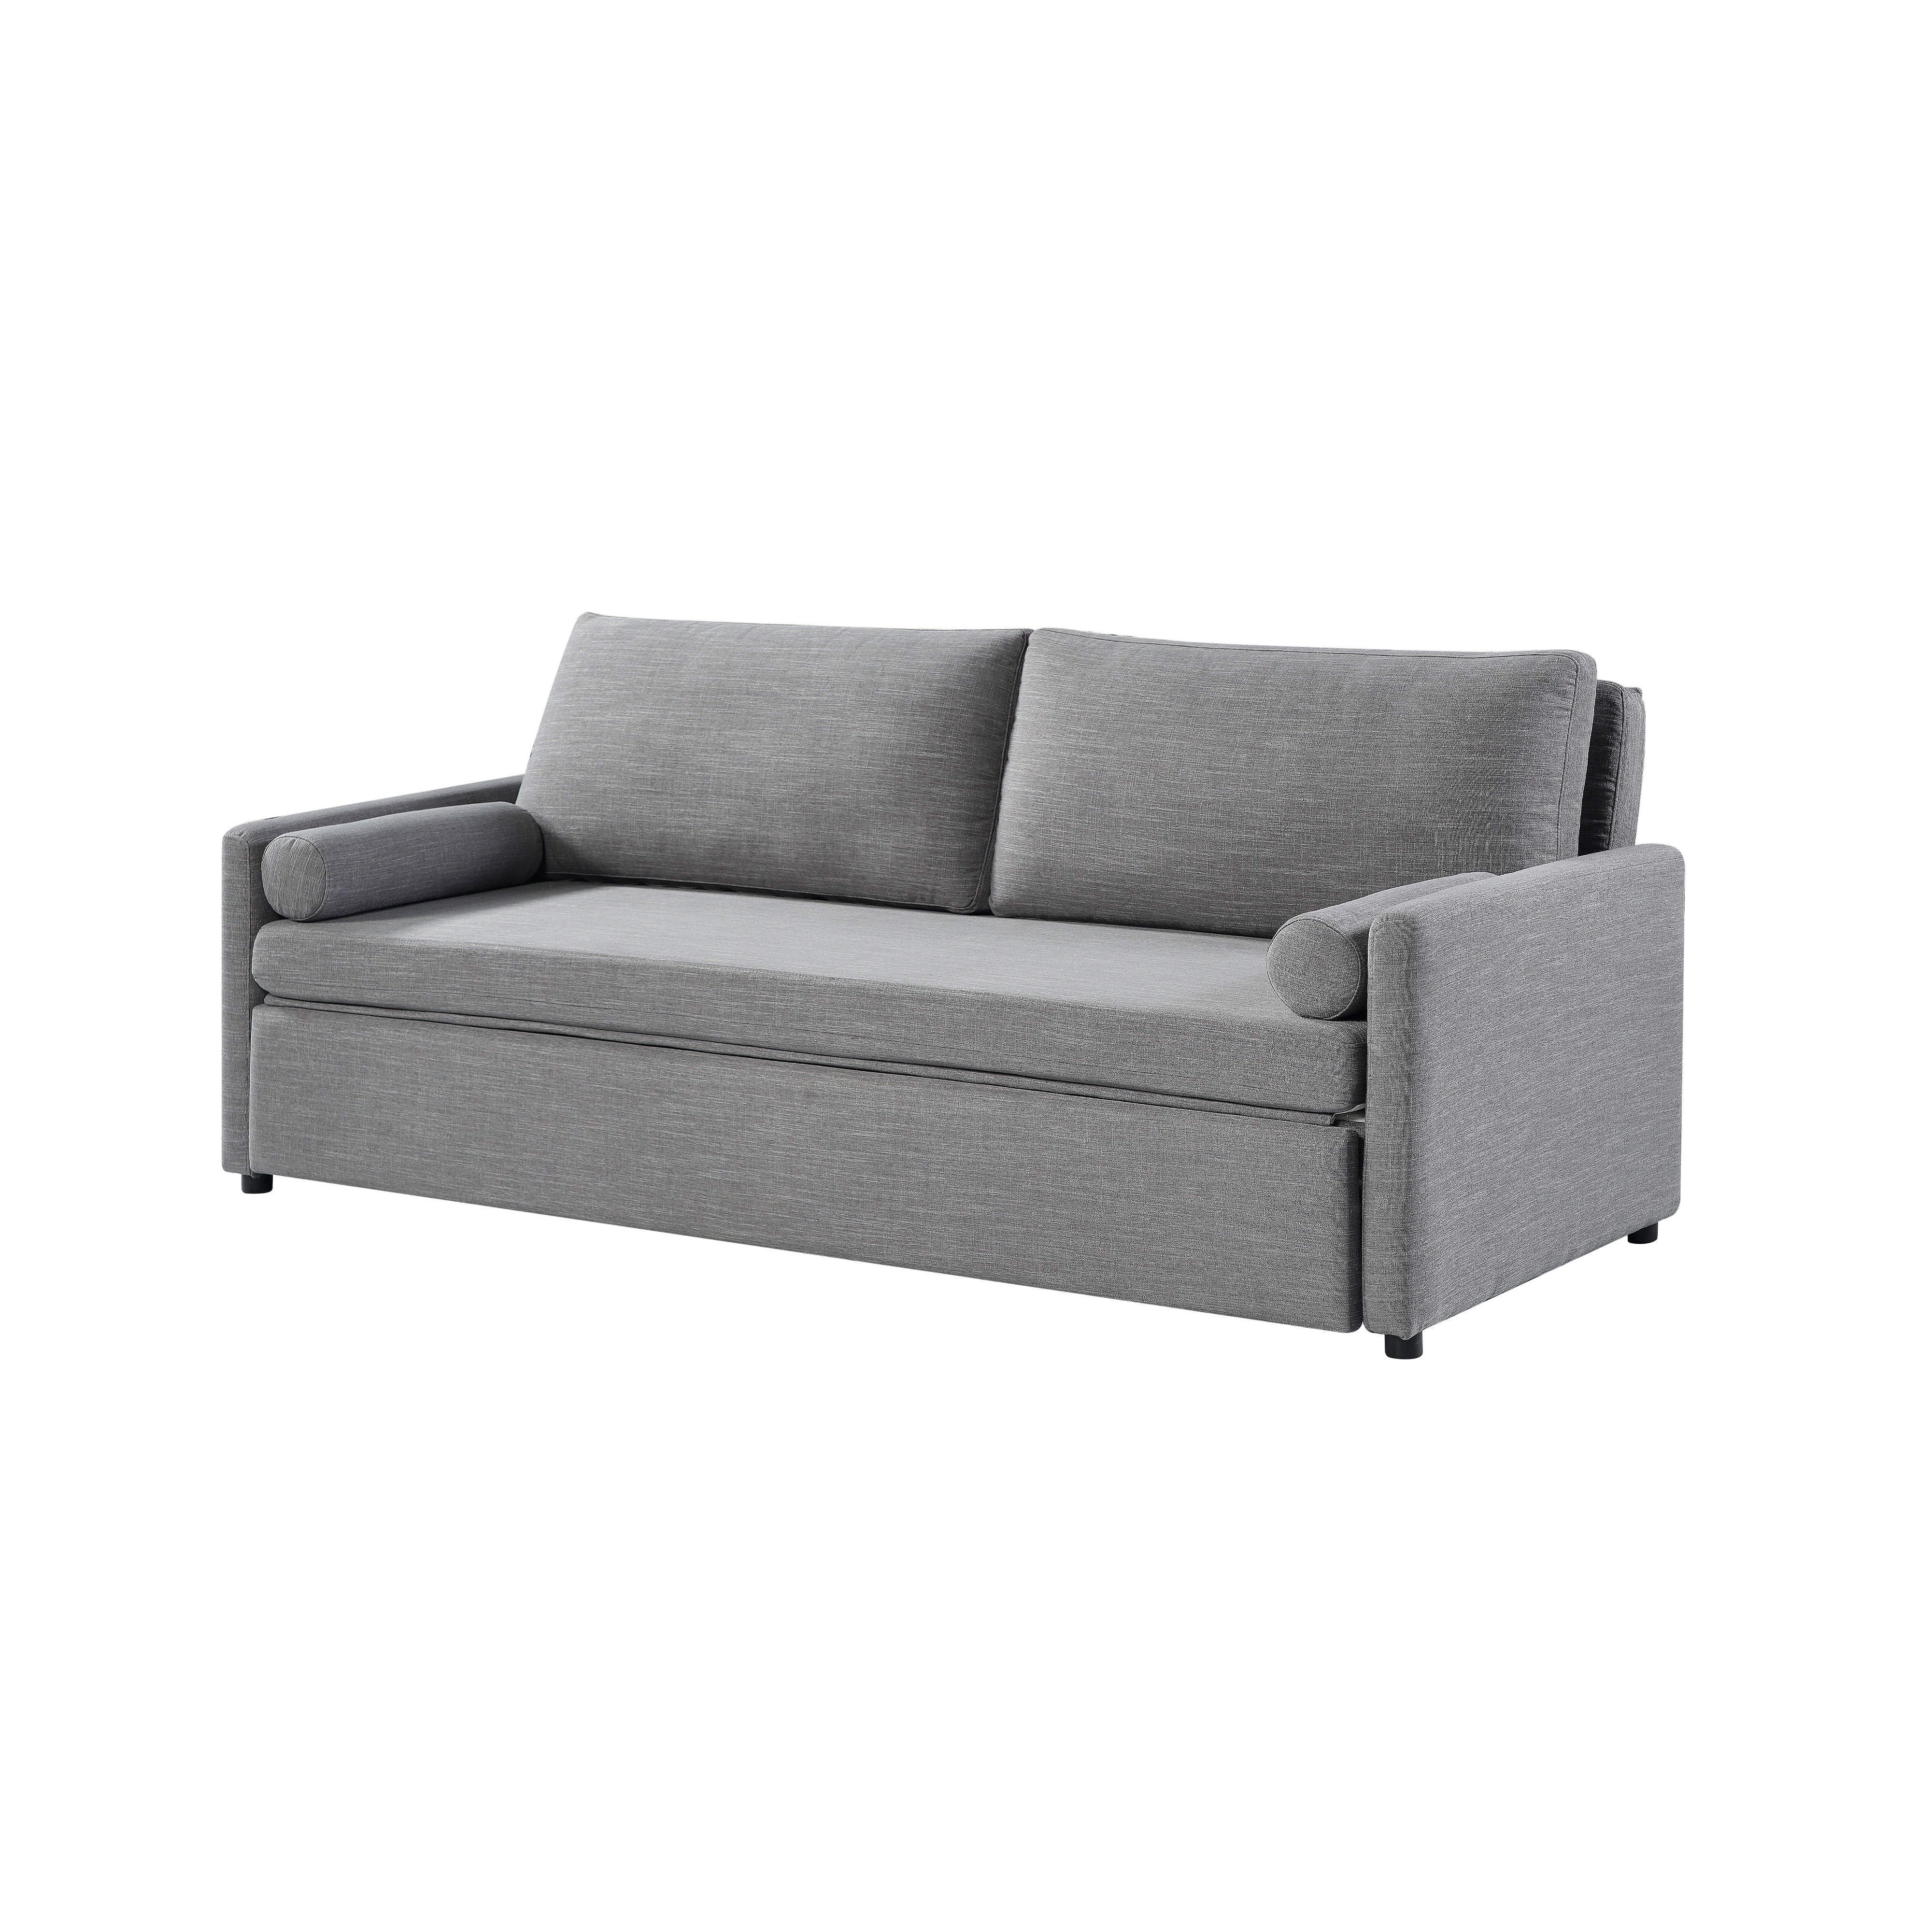 Harmony – Queen Size Memory Foam Sofa Bed - Expand Furniture